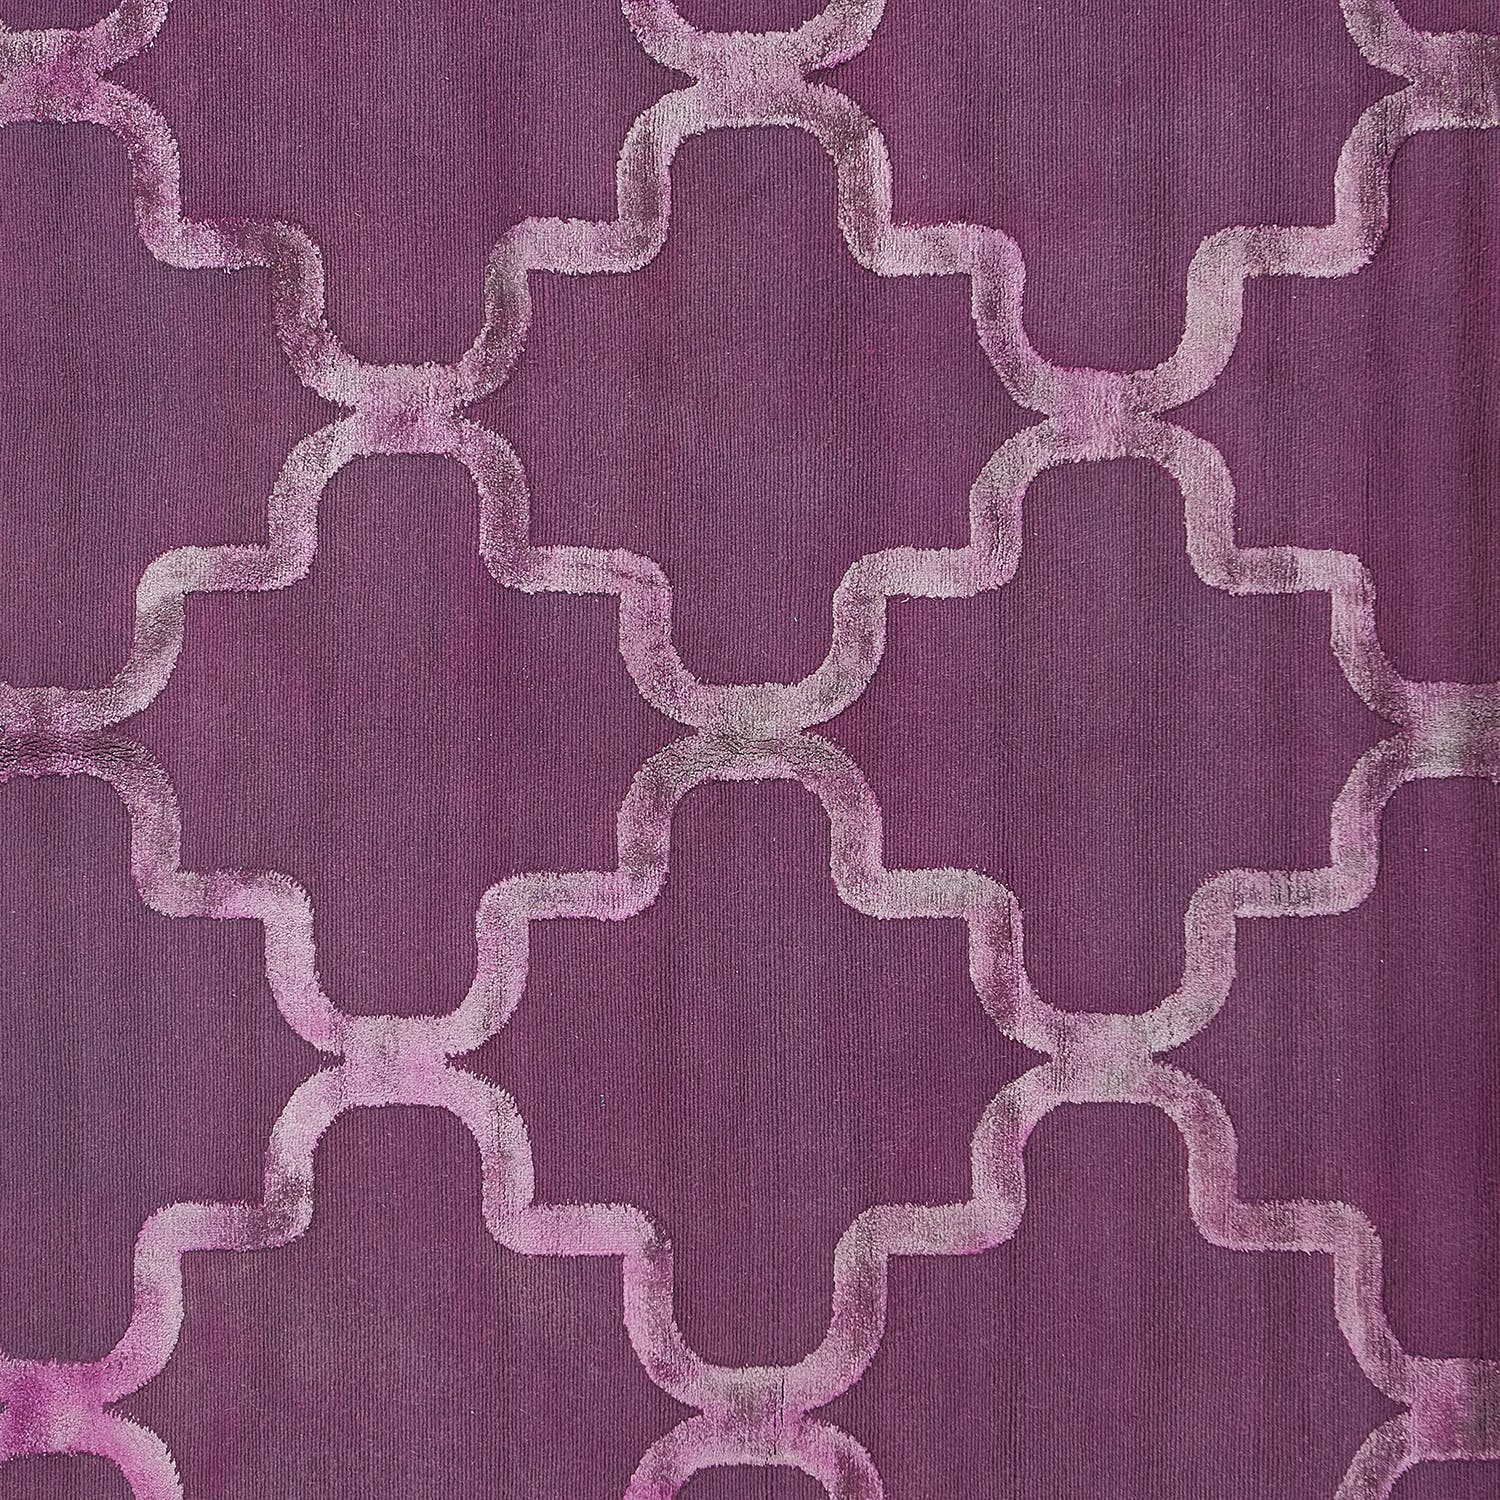 A close-up view of a deep purple fabric with quatrefoil pattern.